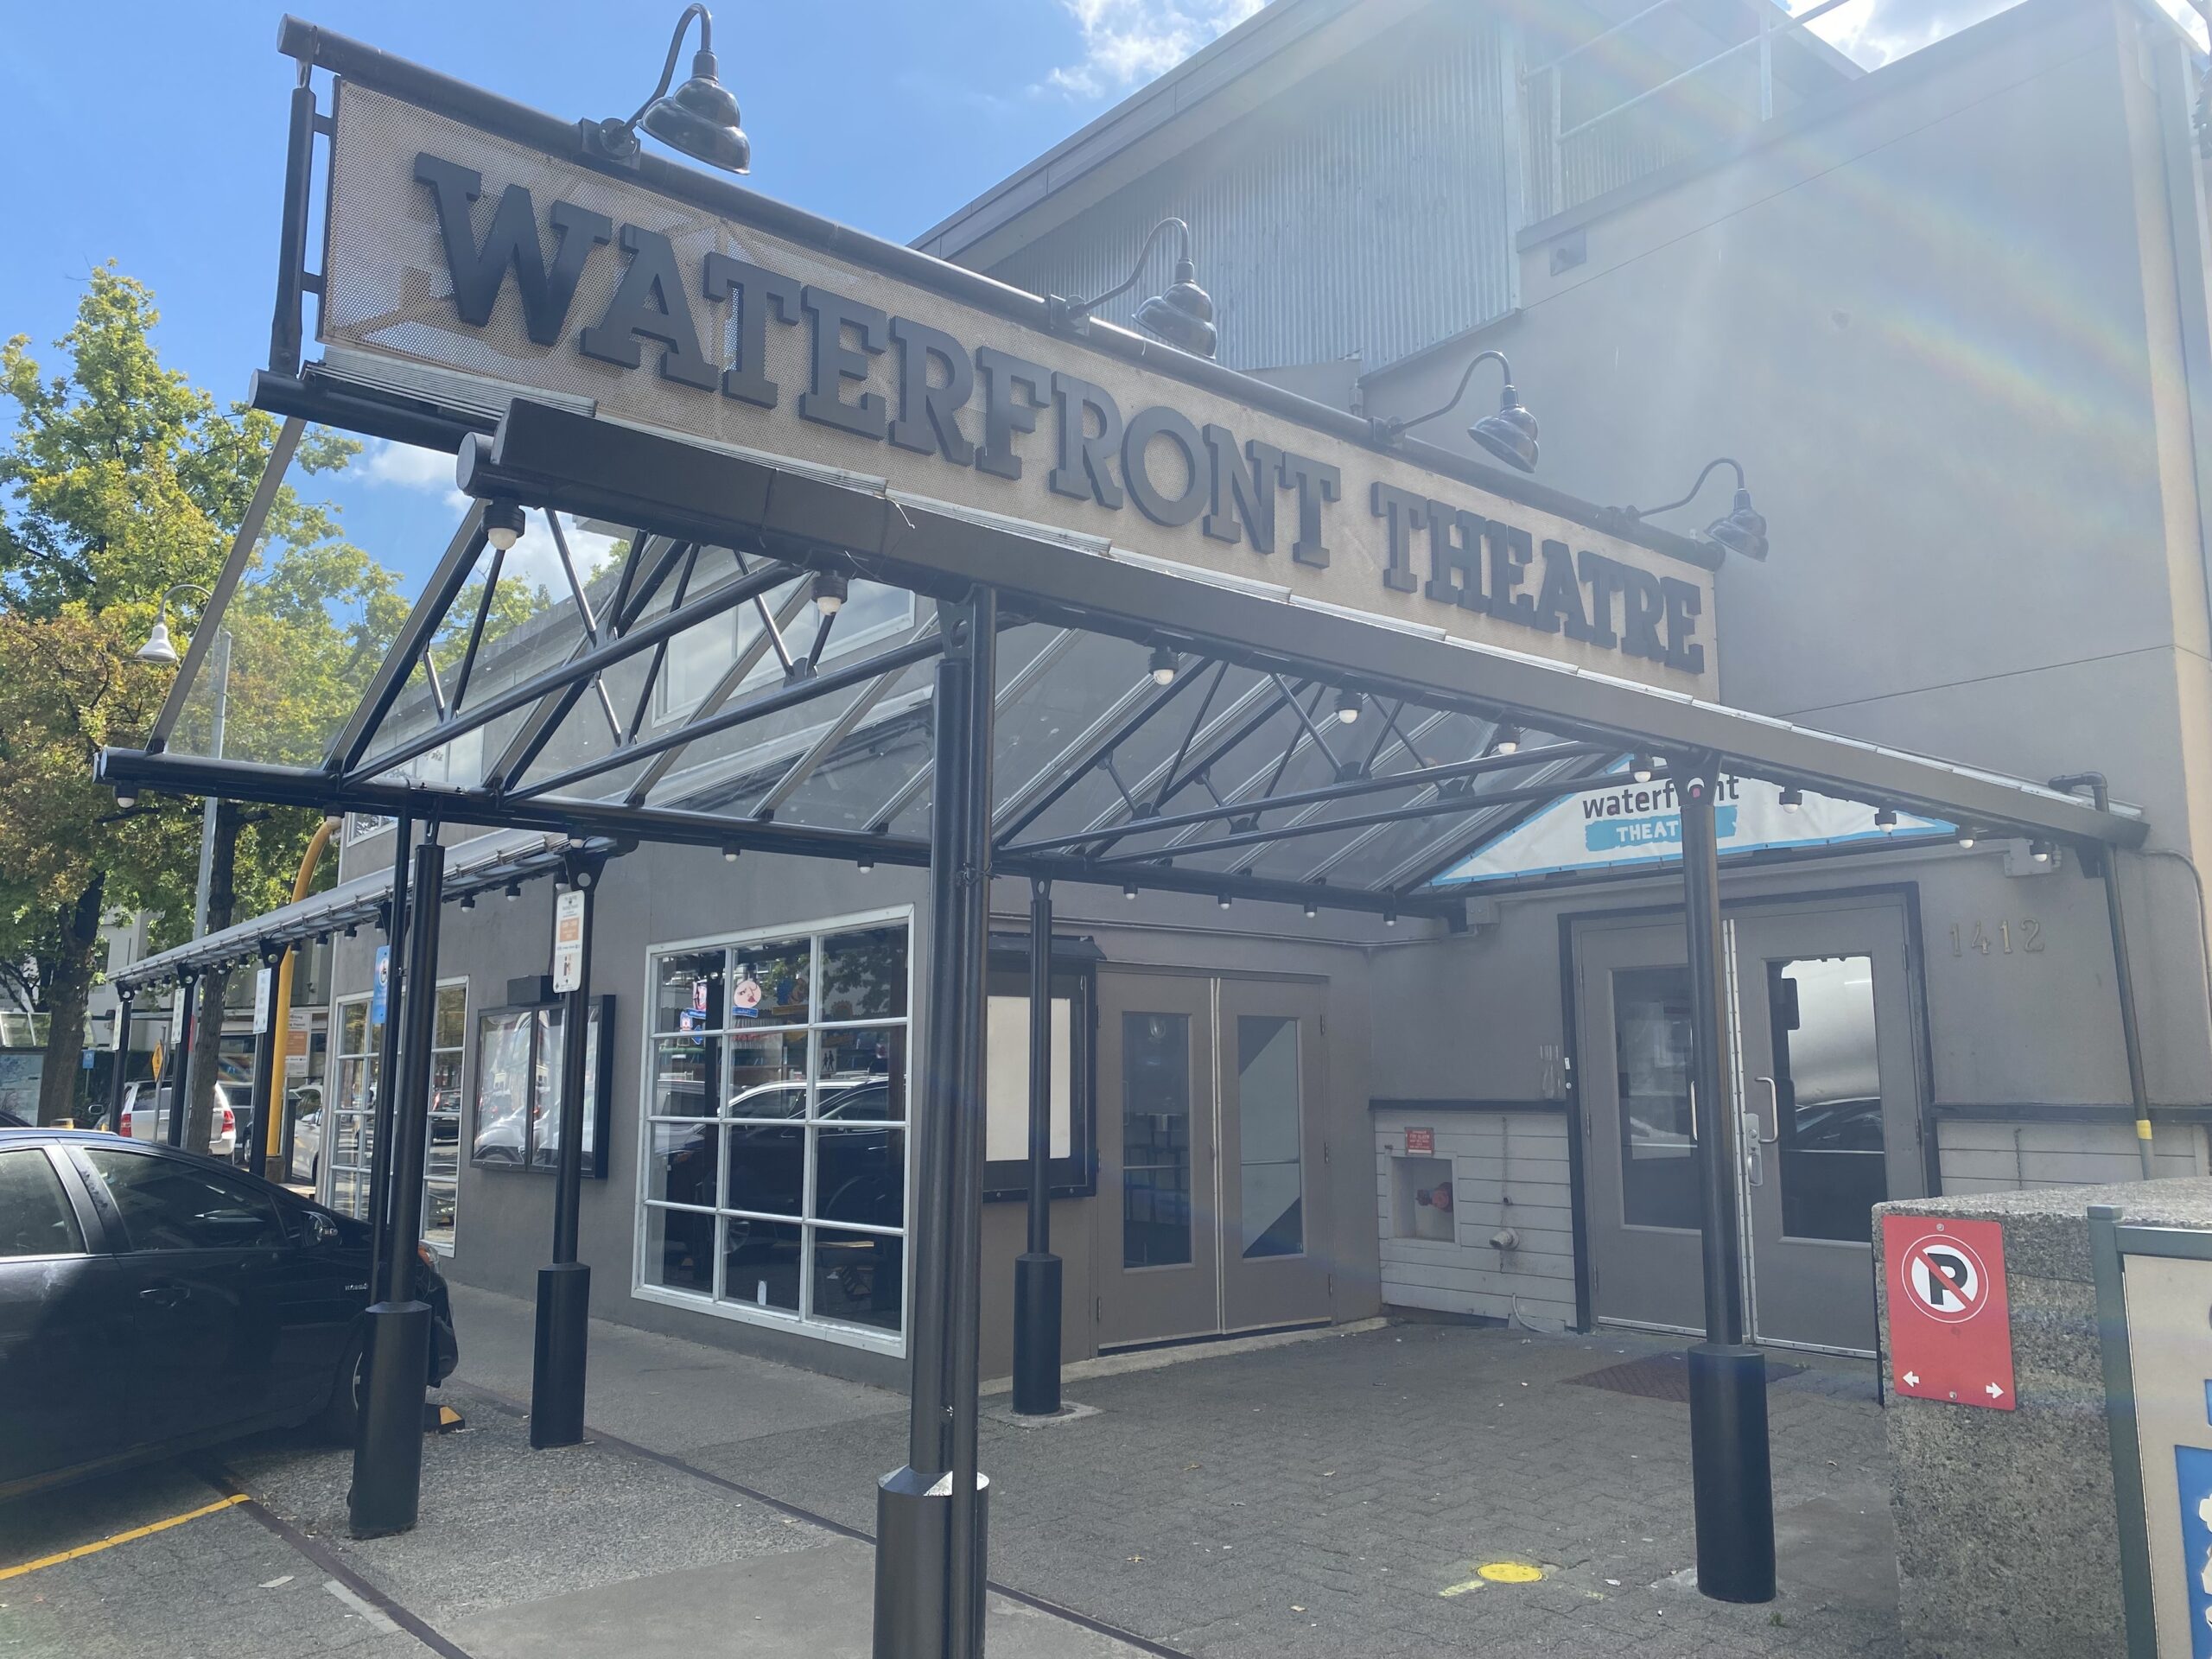 The exterior, front view of Waterfront Theatre.